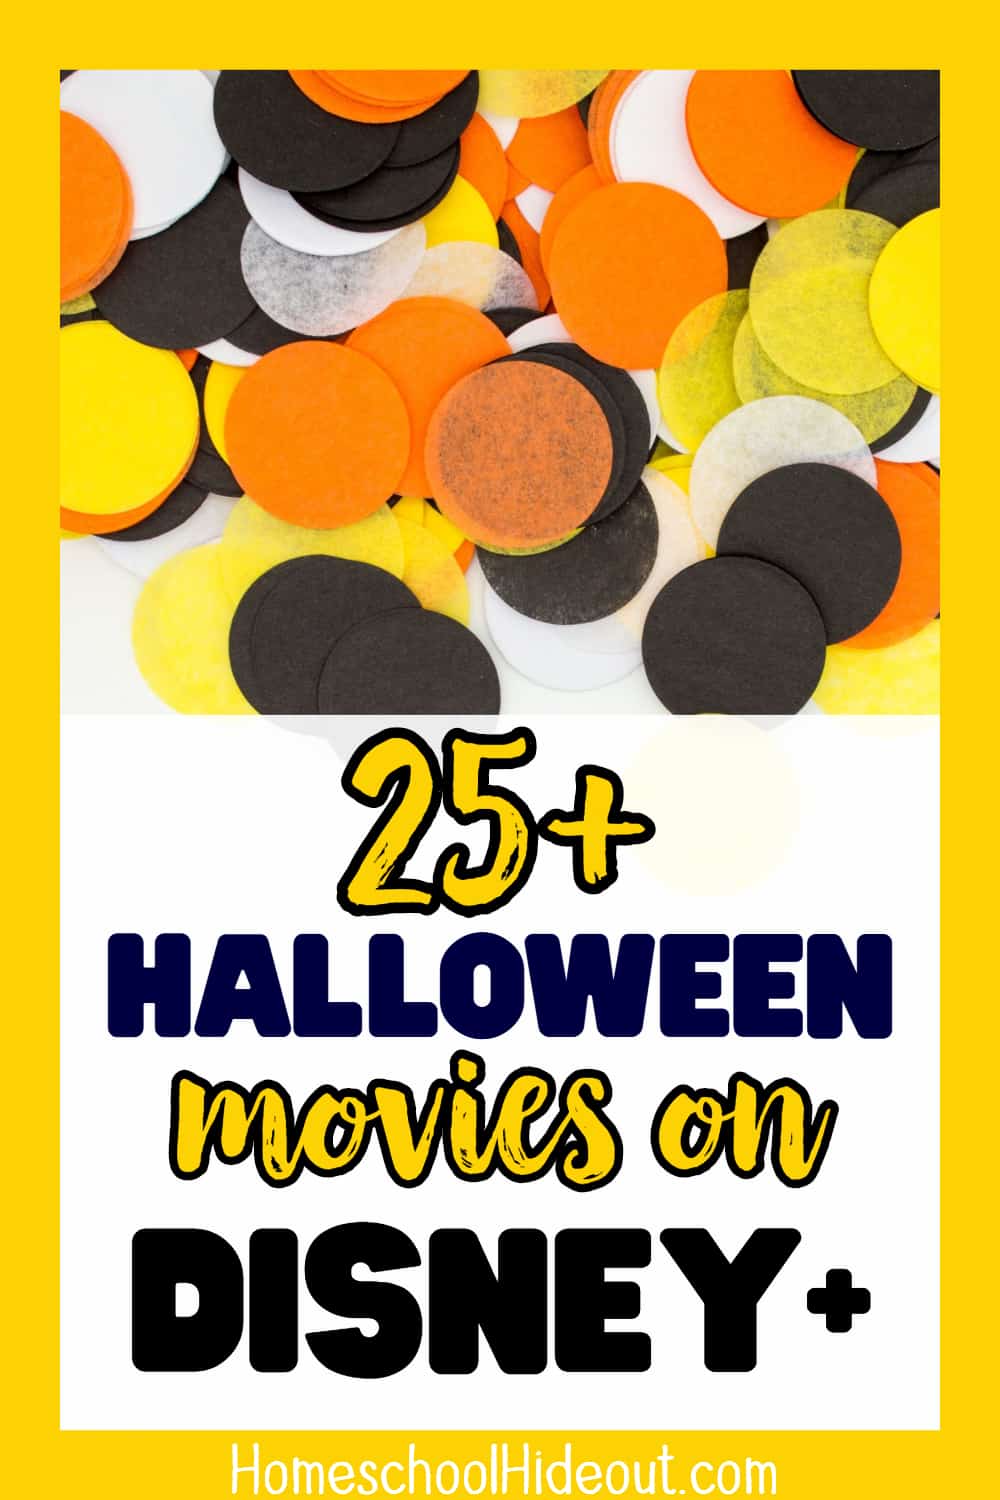 I'm totally gonna binge watch these Halloween movies on Disney+! So many oldies and so many I've never seen! I printed off the list and am hanging it on the fridge!